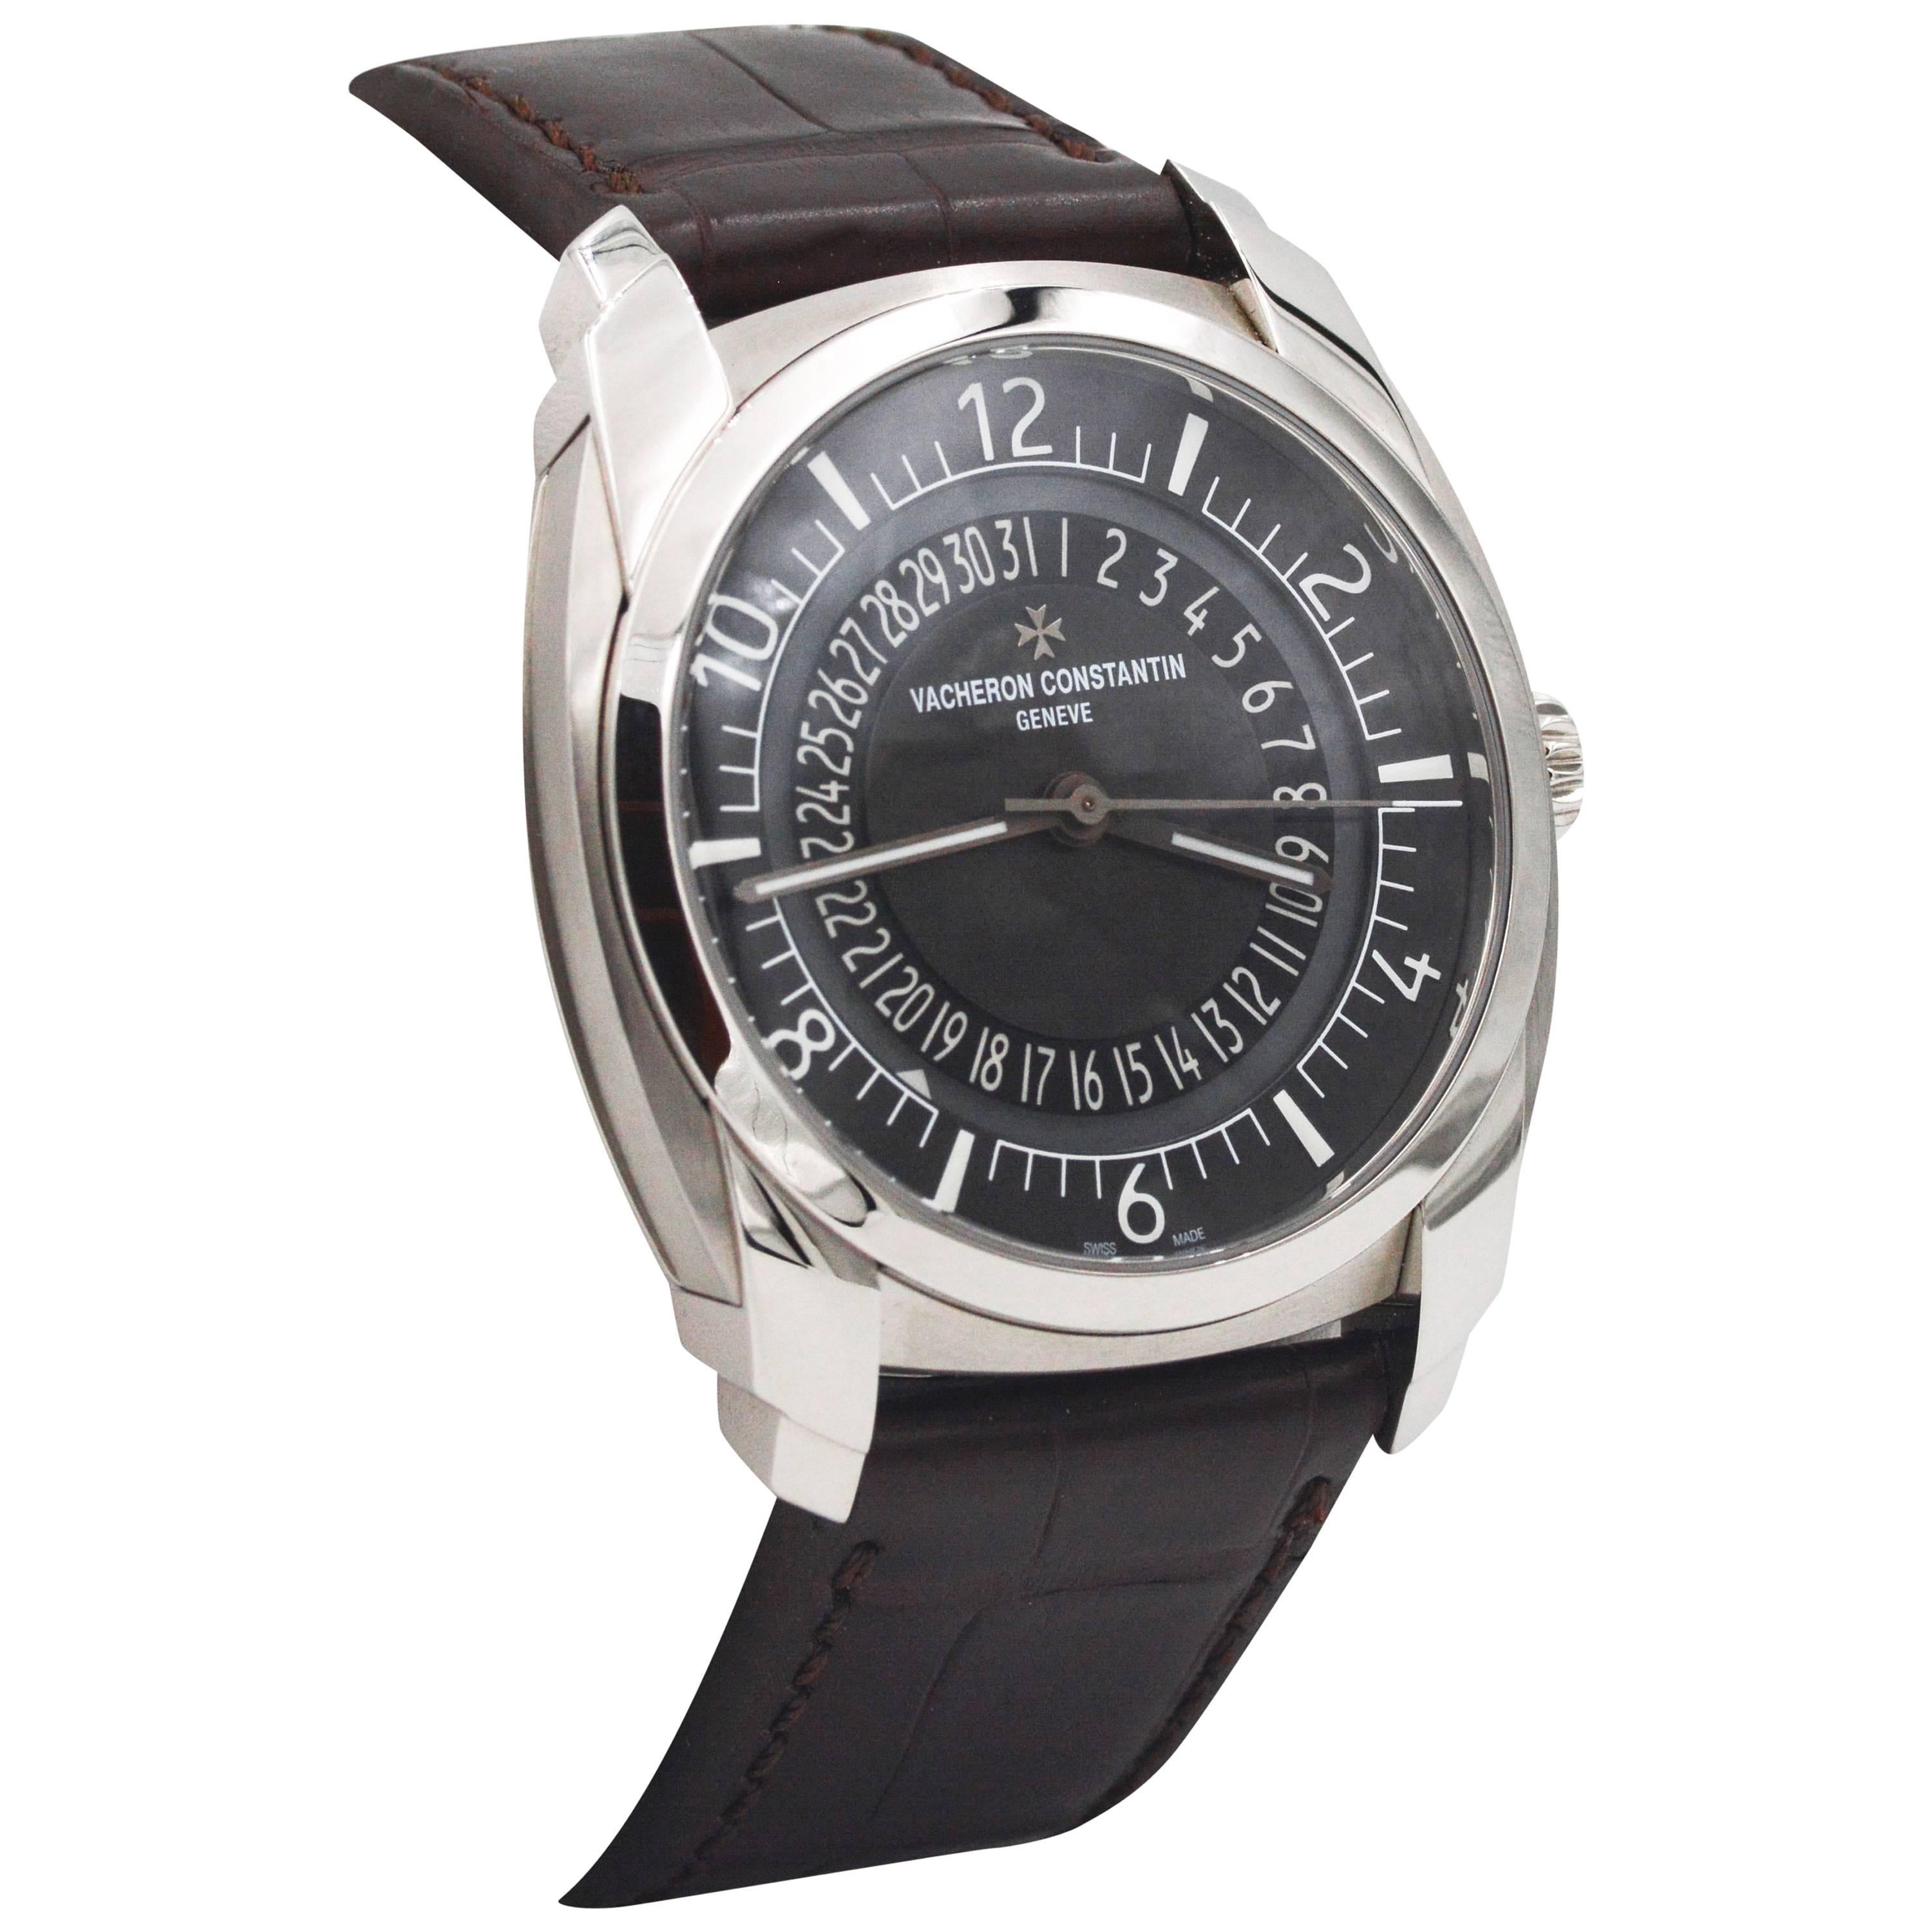 This Vacheron Constantin Quai De L'ILE watch is crafted in stainless steel cushion shaped case that measure 41 mm.  Vacheron finished this time piece with a handsome black dial with contrasting white Arabic numerals and dial indices.  The dial also